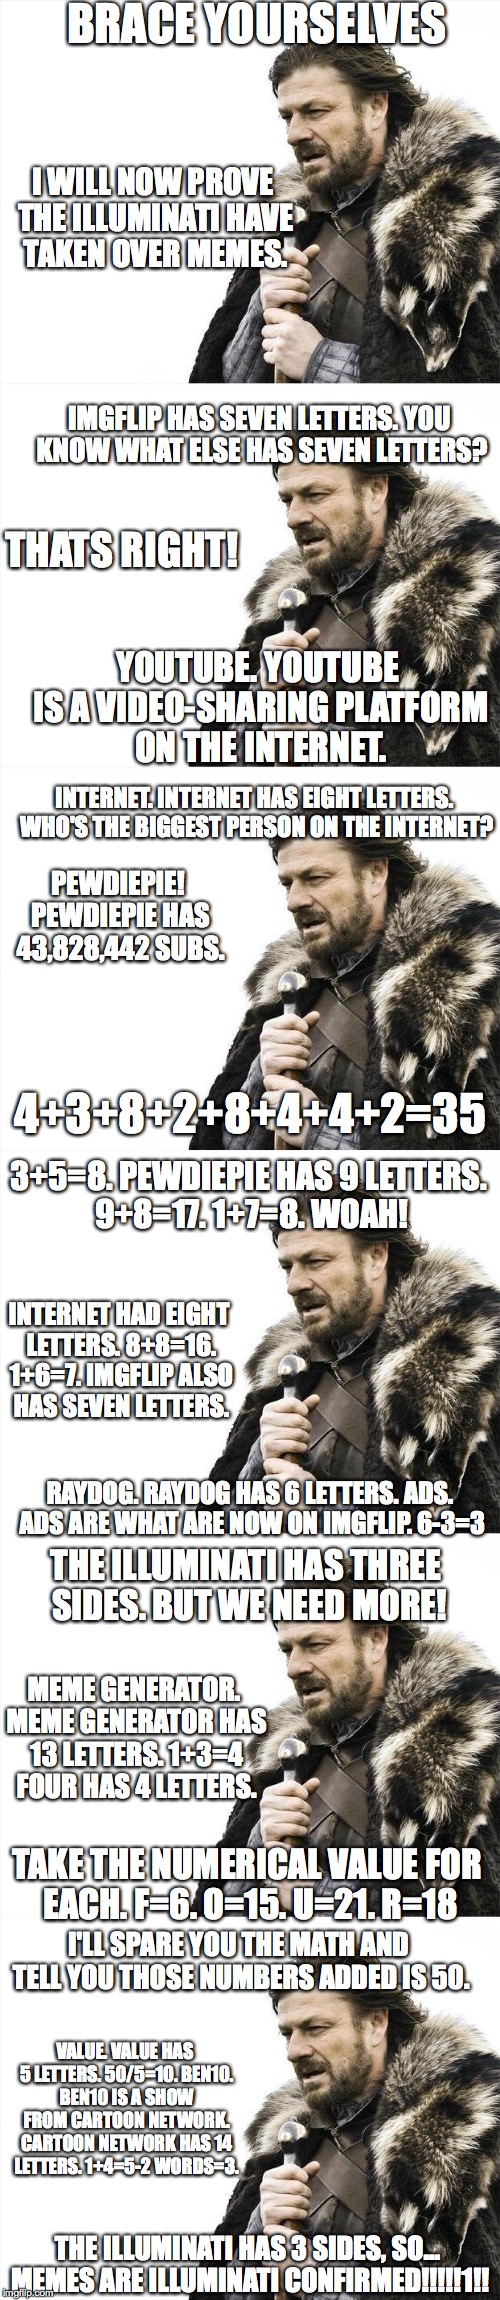 Illuminati is Illuminati is Illuminati is Illuminati is Illuminati Confirmed! | BRACE YOURSELVES; I WILL NOW PROVE THE ILLUMINATI HAVE TAKEN OVER MEMES. IMGFLIP HAS SEVEN LETTERS. YOU KNOW WHAT ELSE HAS SEVEN LETTERS? THATS RIGHT! YOUTUBE. YOUTUBE IS A VIDEO-SHARING PLATFORM ON THE INTERNET. INTERNET. INTERNET HAS EIGHT LETTERS. WHO'S THE BIGGEST PERSON ON THE INTERNET? PEWDIEPIE! PEWDIEPIE HAS 43,828,442 SUBS. 4+3+8+2+8+4+4+2=35; 3+5=8. PEWDIEPIE HAS 9 LETTERS. 9+8=17. 1+7=8. WOAH! INTERNET HAD EIGHT LETTERS. 8+8=16. 1+6=7. IMGFLIP ALSO HAS SEVEN LETTERS. RAYDOG. RAYDOG HAS 6 LETTERS. ADS. ADS ARE WHAT ARE NOW ON IMGFLIP. 6-3=3; THE ILLUMINATI HAS THREE SIDES. BUT WE NEED MORE! MEME GENERATOR. MEME GENERATOR HAS 13 LETTERS. 1+3=4 FOUR HAS 4 LETTERS. TAKE THE NUMERICAL VALUE FOR EACH. F=6. O=15. U=21. R=18; I'LL SPARE YOU THE MATH AND TELL YOU THOSE NUMBERS ADDED IS 50. VALUE. VALUE HAS 5 LETTERS. 50/5=10. BEN10. BEN10 IS A SHOW FROM CARTOON NETWORK. CARTOON NETWORK HAS 14 LETTERS. 1+4=5-2 WORDS=3. THE ILLUMINATI HAS 3 SIDES, SO... MEMES ARE ILLUMINATI CONFIRMED!!!!!1!! | image tagged in unbelievable,illuminati,confirmed | made w/ Imgflip meme maker